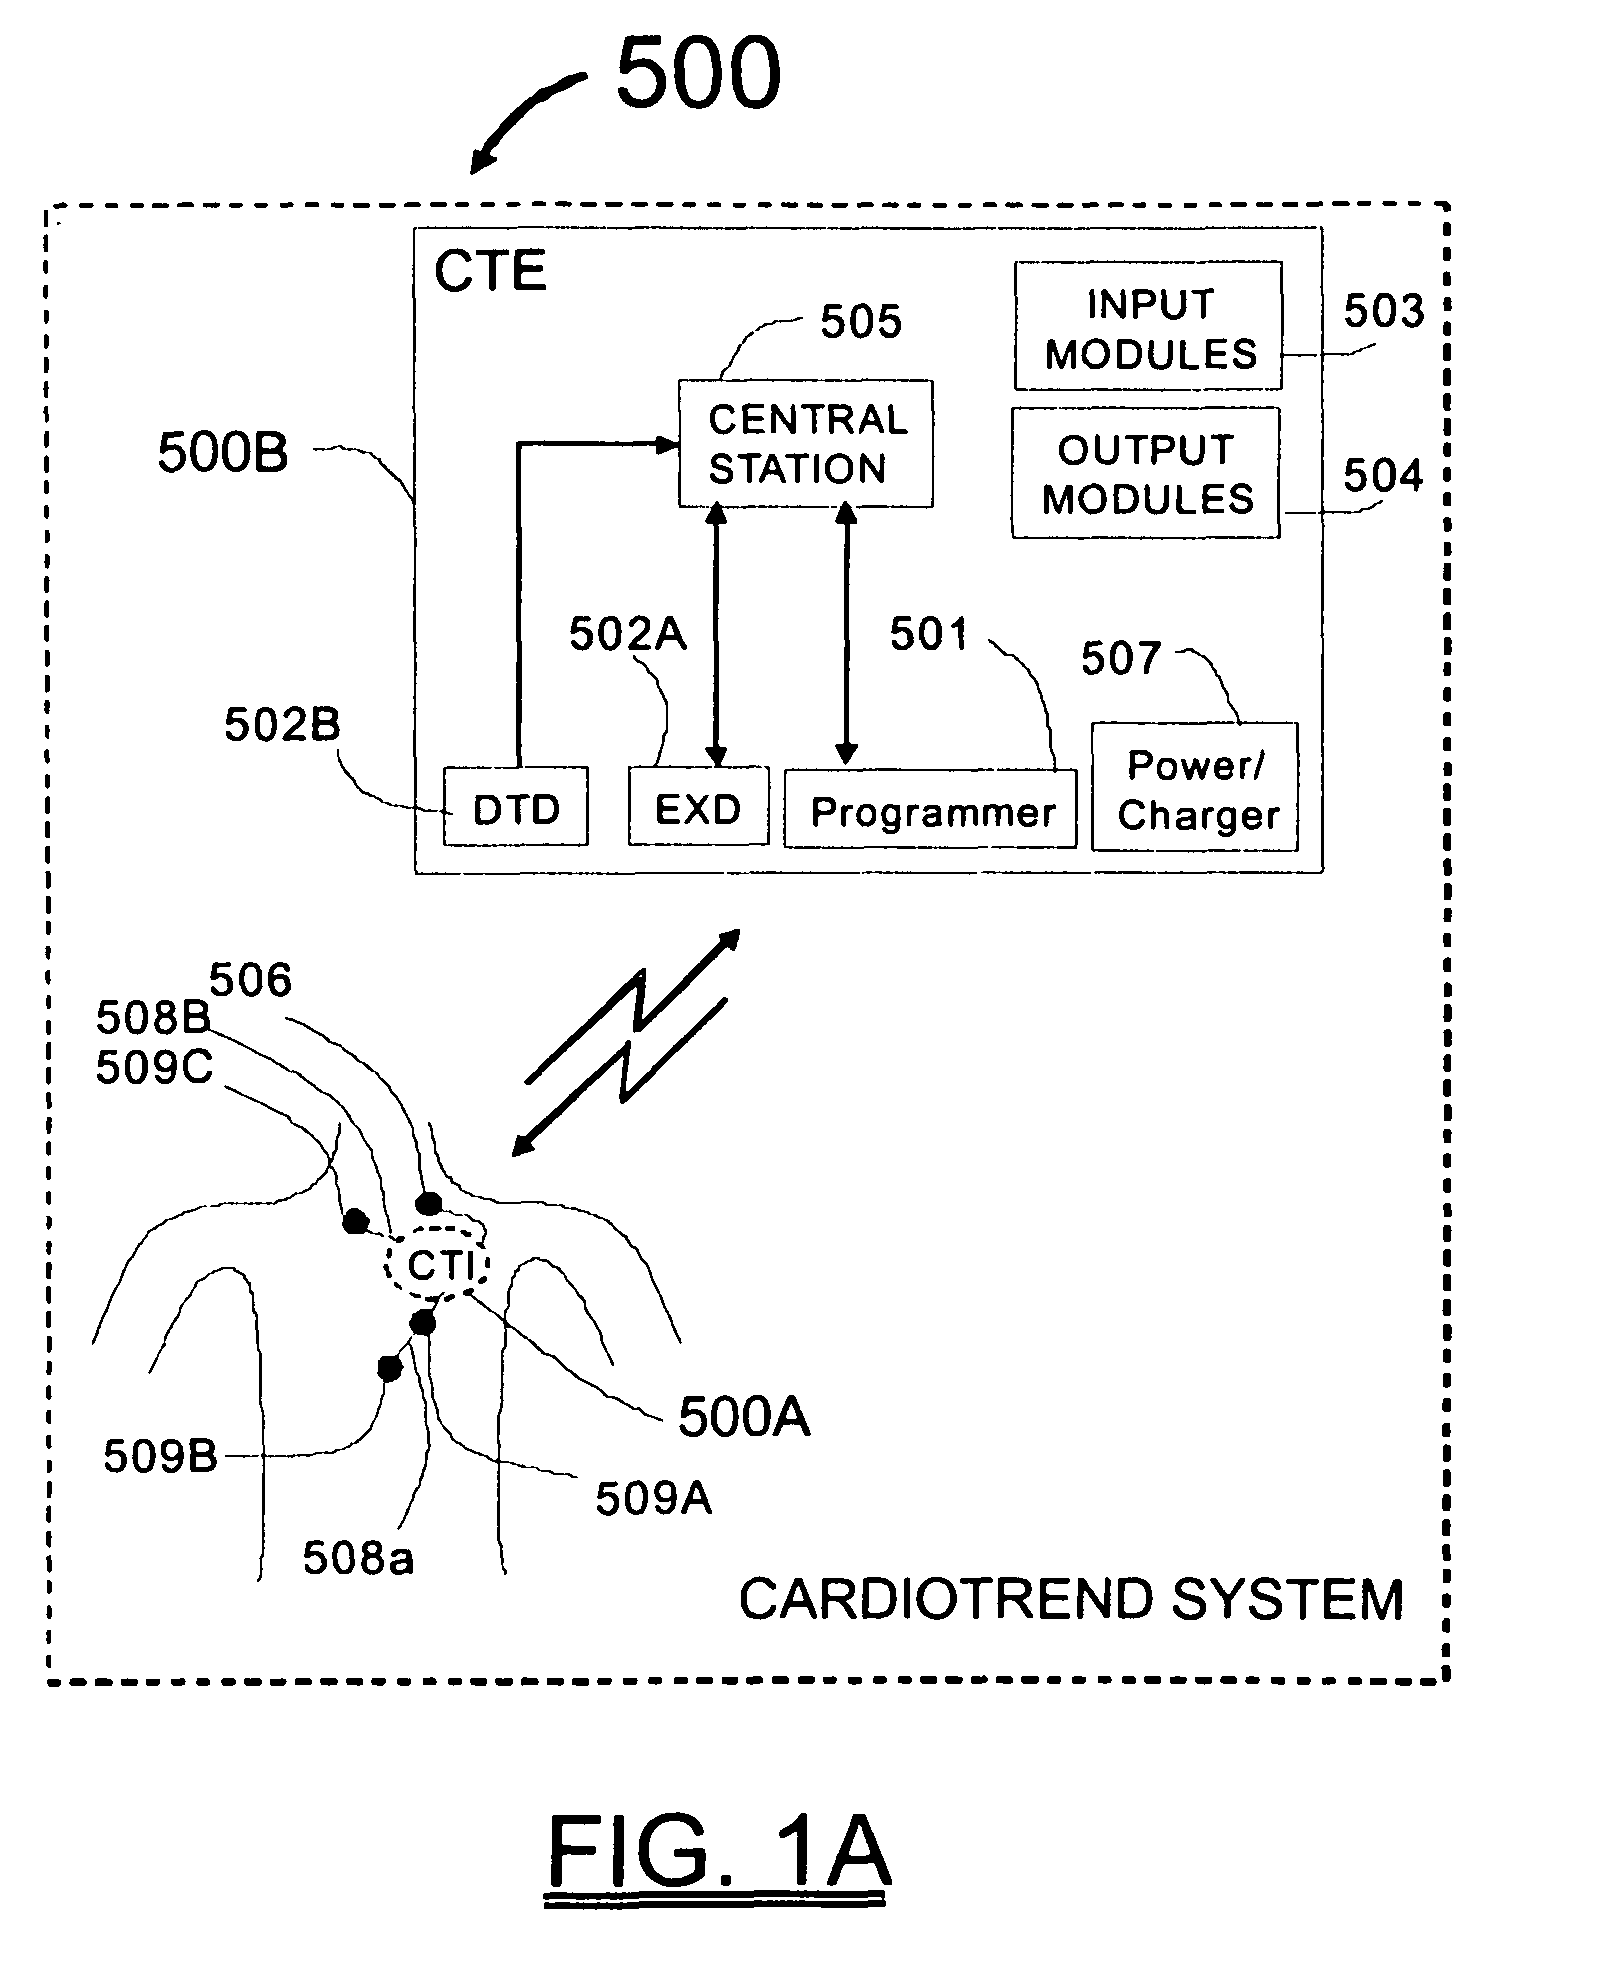 System and methods for sliding-scale cardiac event detection